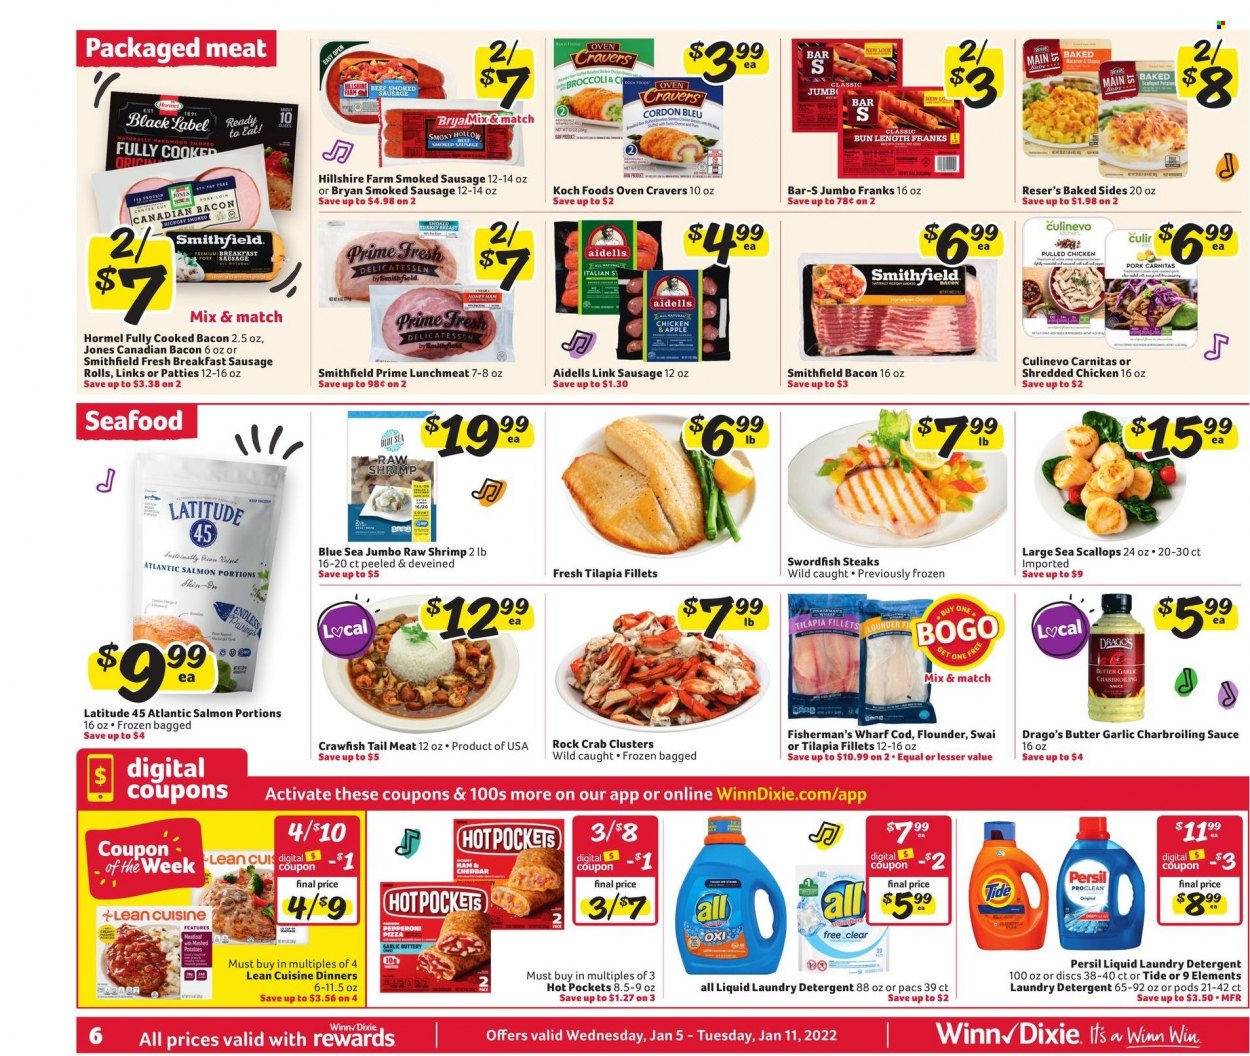 thumbnail - Winn Dixie Flyer - 01/05/2022 - 01/11/2022 - Sales products - sausage rolls, cod, flounder, salmon, scallops, swordfish, tilapia, seafood, crab, shrimps, mashed potatoes, hot pocket, pizza, sauce, meatloaf, Lean Cuisine, pulled chicken, Hormel, bacon, canadian bacon, ham, Hillshire Farm, Bryan, sausage, smoked sausage, pepperoni, lunch meat, crawfish, cordon bleu, L'Or, steak, detergent, Tide, Persil, laundry detergent, fork. Page 6.